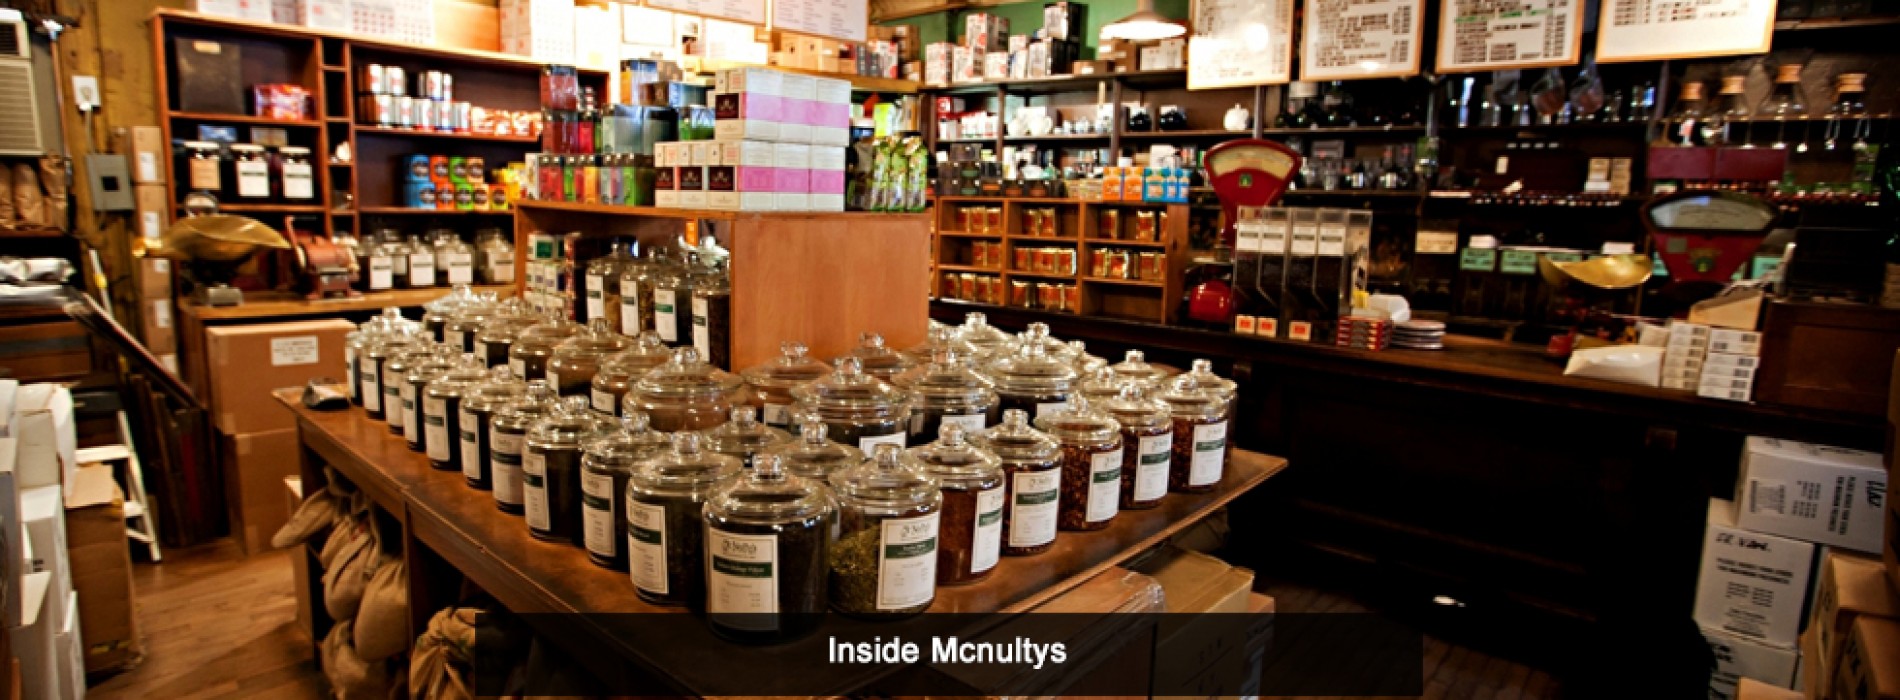 NYC & Company encourages visitors to seek out diverse array of Tea in NYC